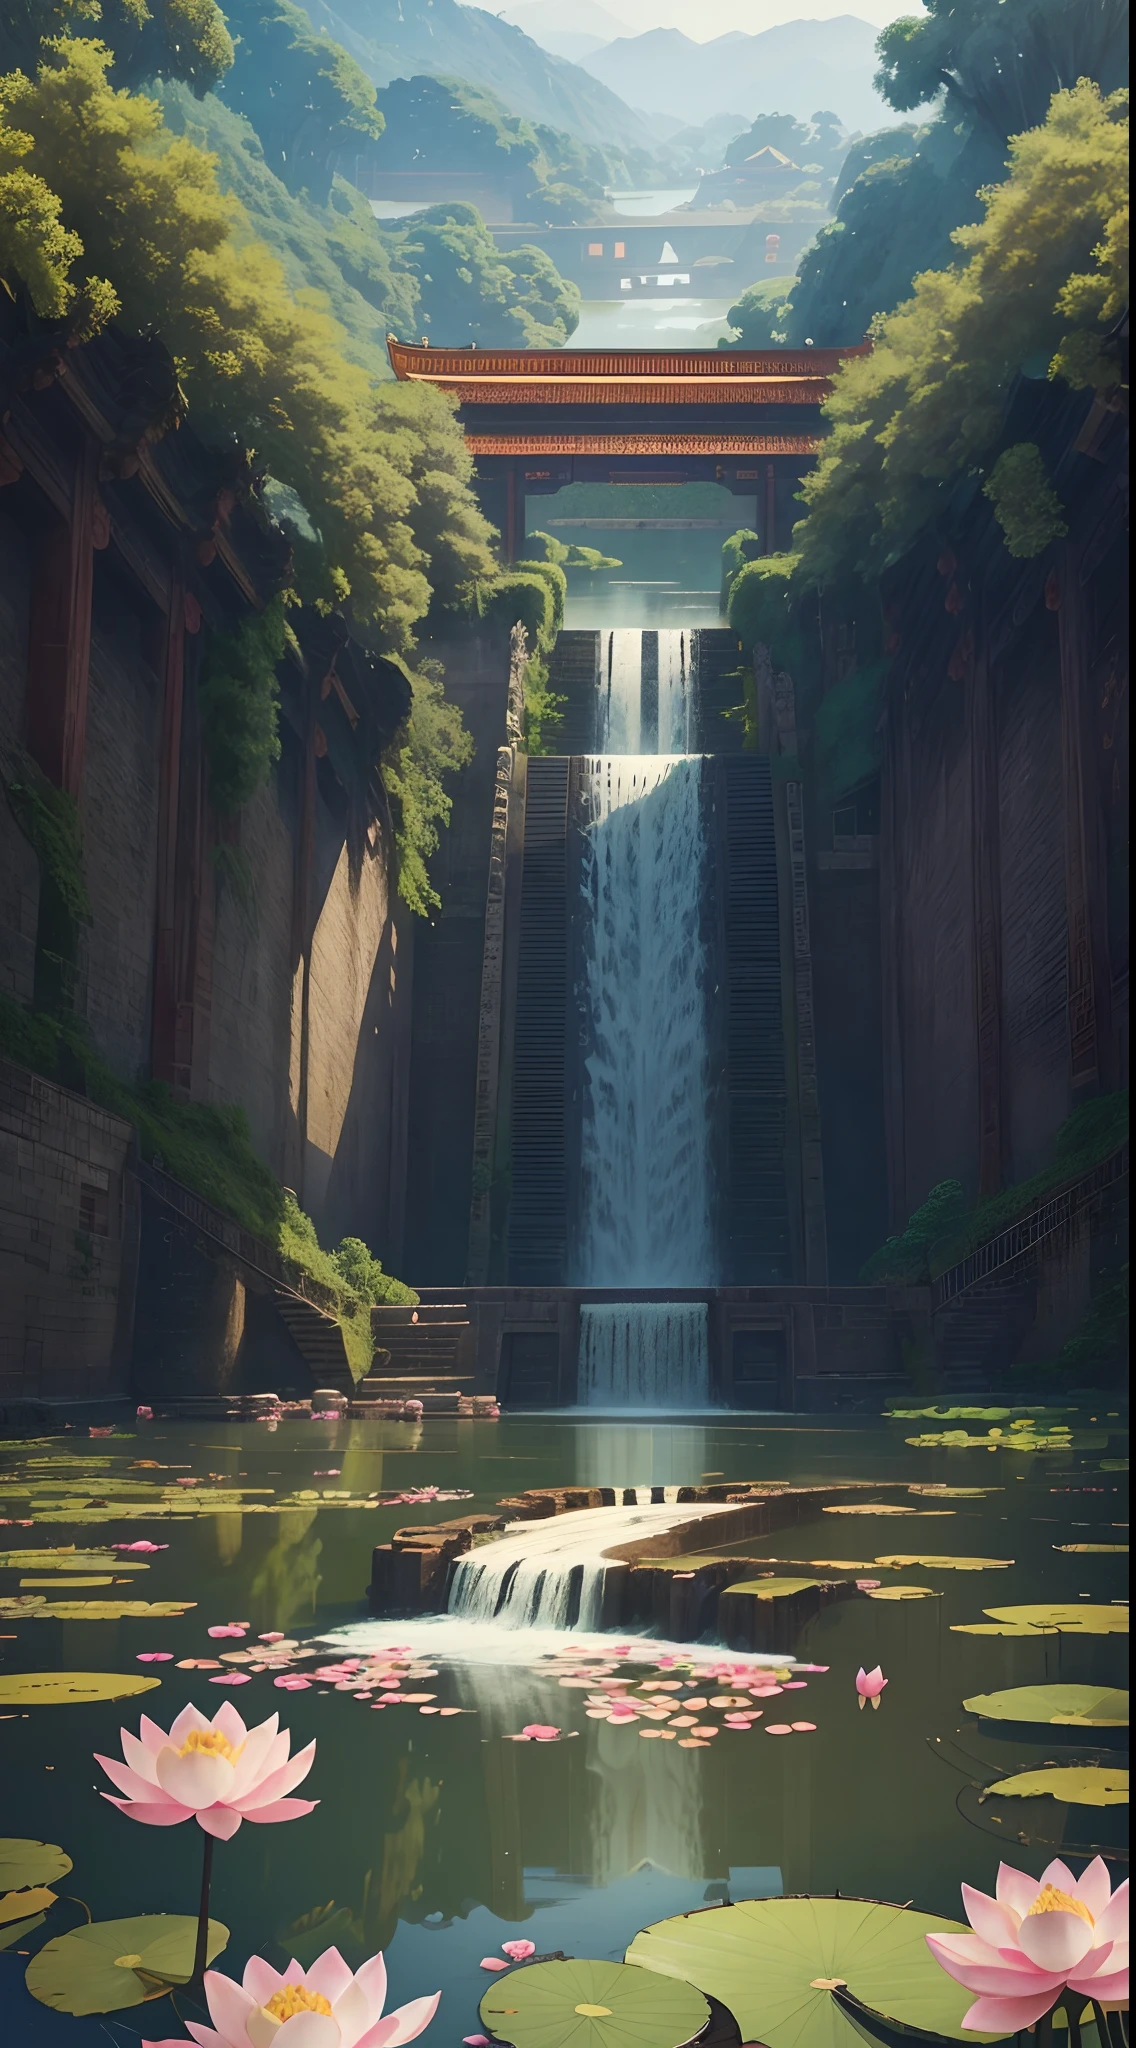 Composition, Illustration, Wide-shot, Lotus flowers floating, passing through Ancient chinese water dam, camera centered on the lotus flowers, ancient chinese scenery, nature, beautiful, super intricate, elegant, hyper detailed, Best quality, 8k uhd, no flaws.